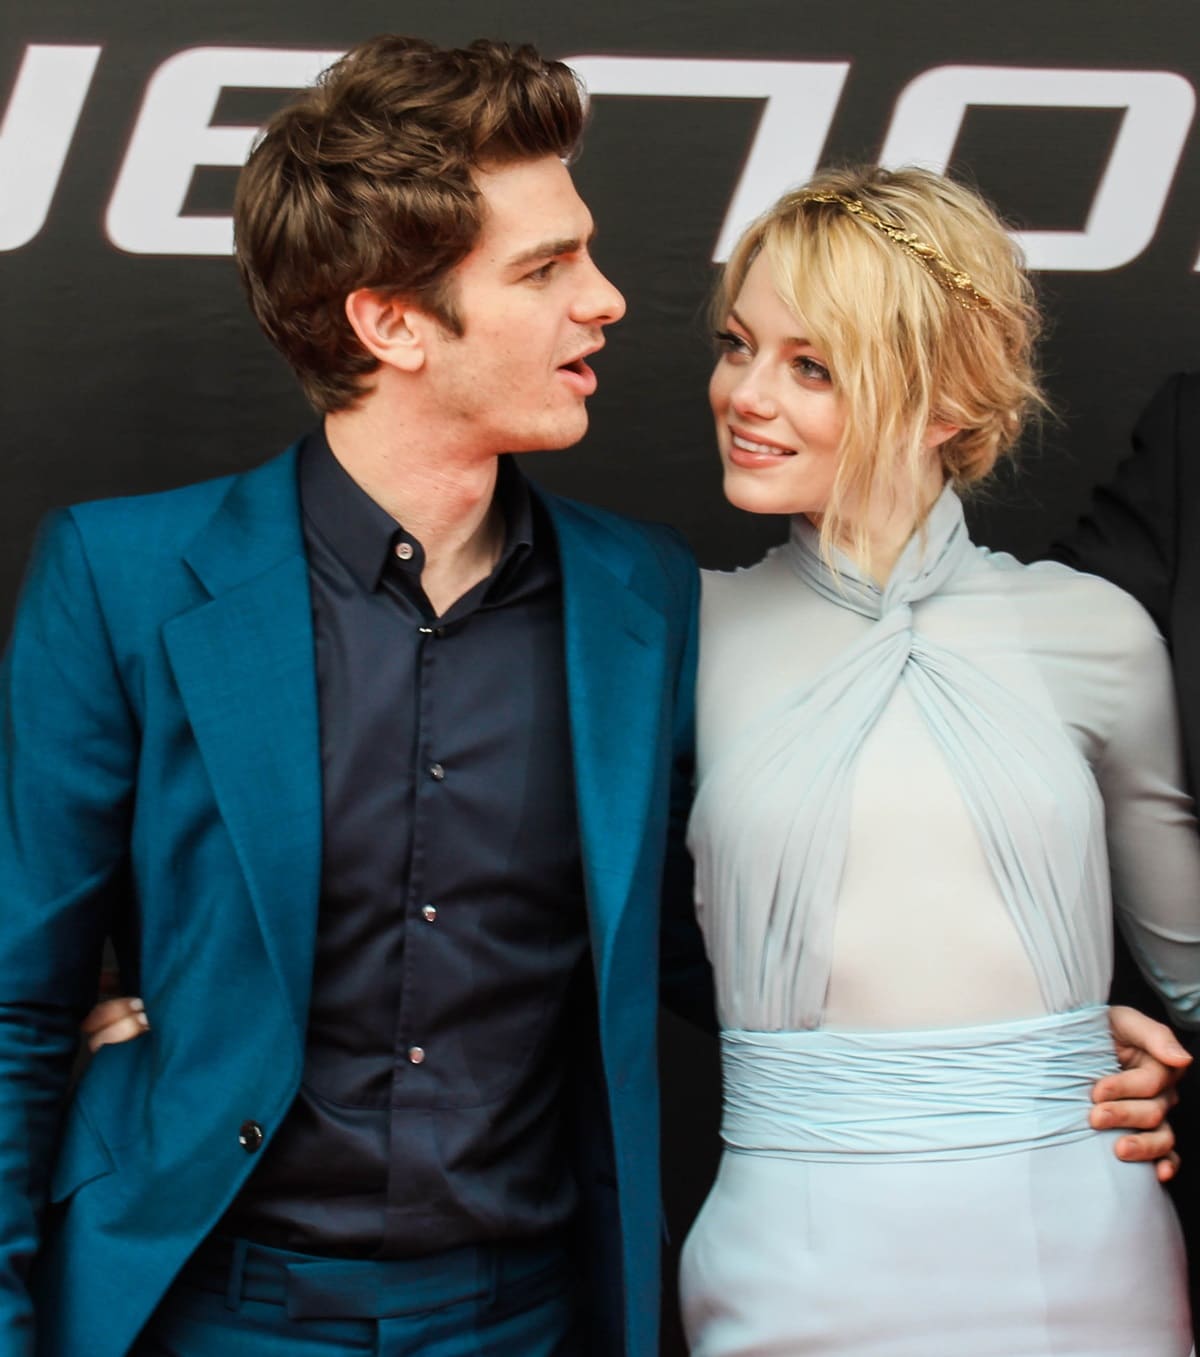 Andrew Garfield and Emma Stone at The Amazing Spider-Man premiere in Moscow